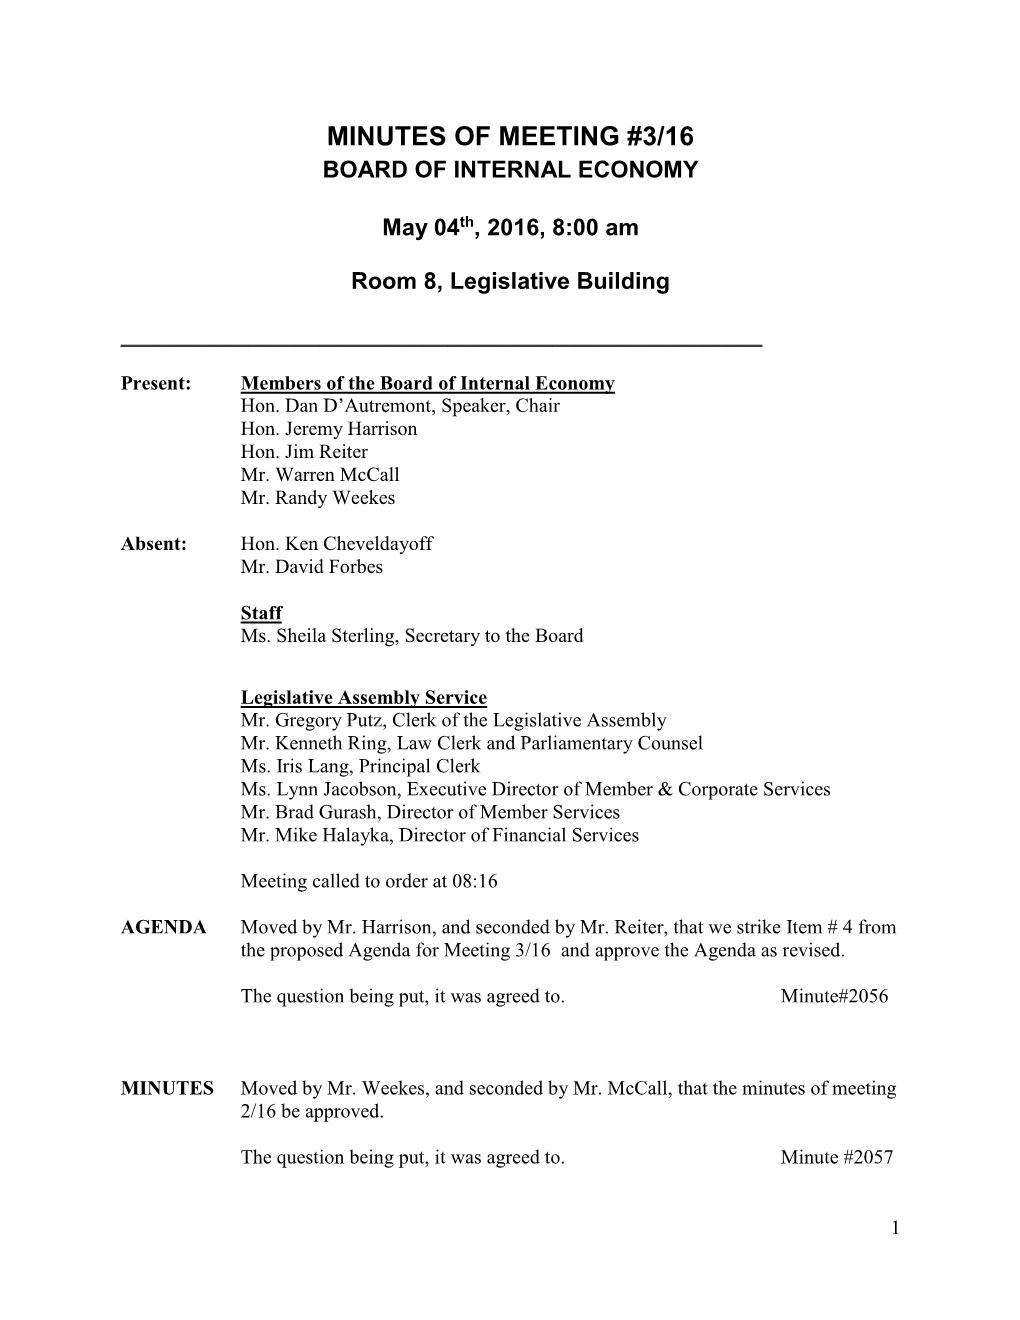 Minutes of Meeting #3/16 Board of Internal Economy